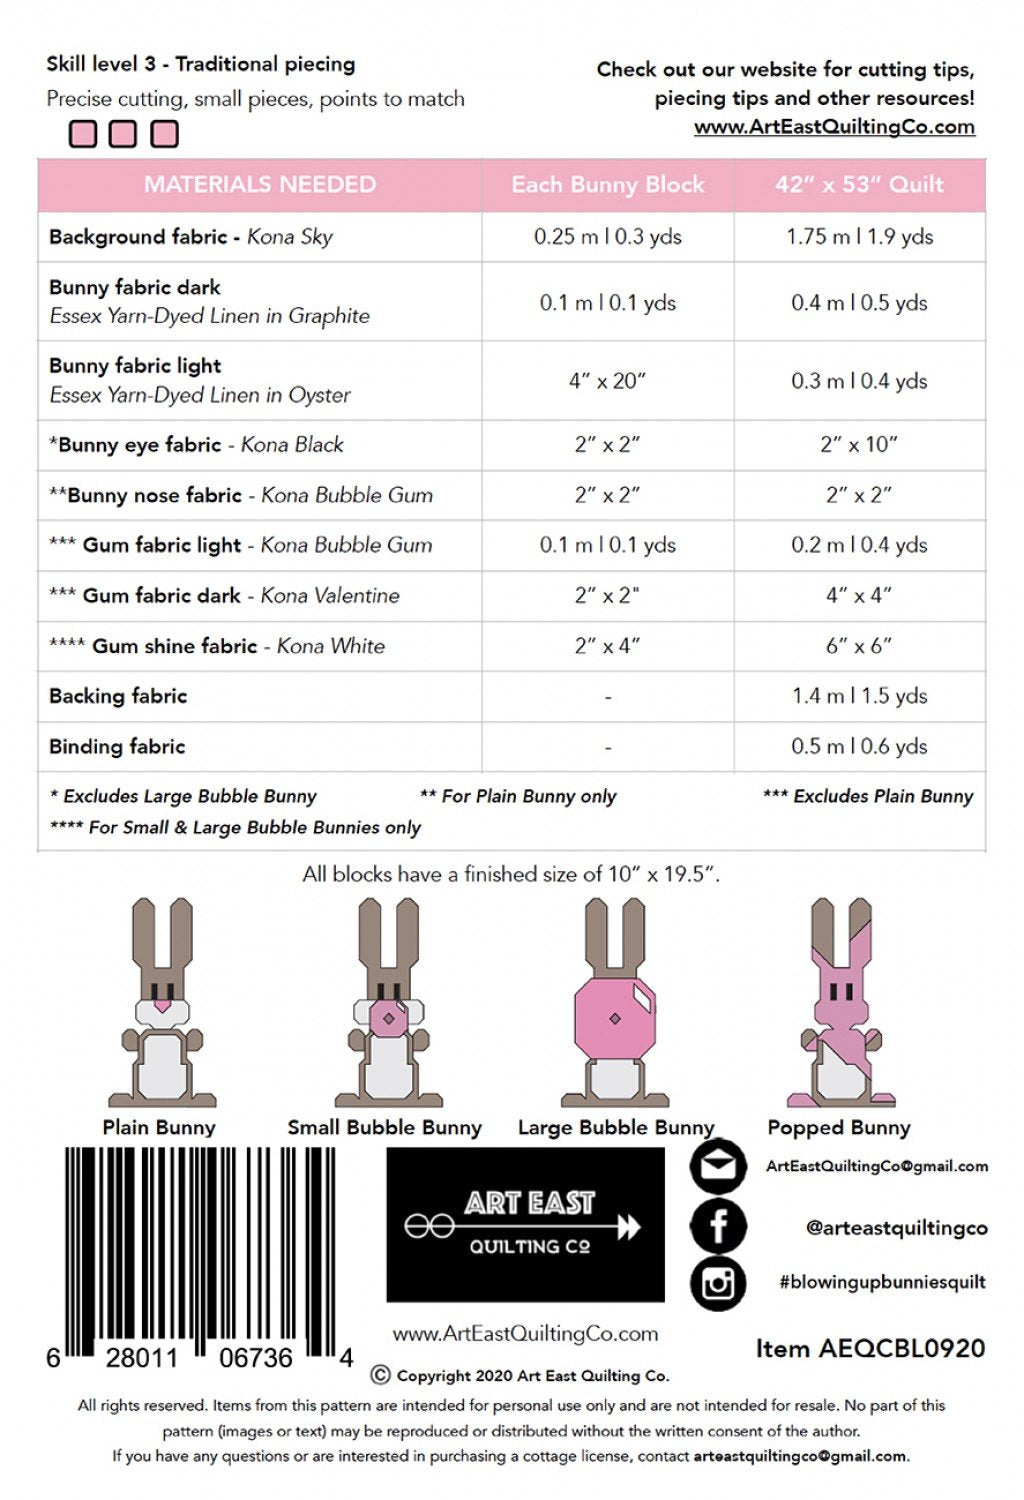 Art East Quilting - Blowing Up Bunnies Pattern